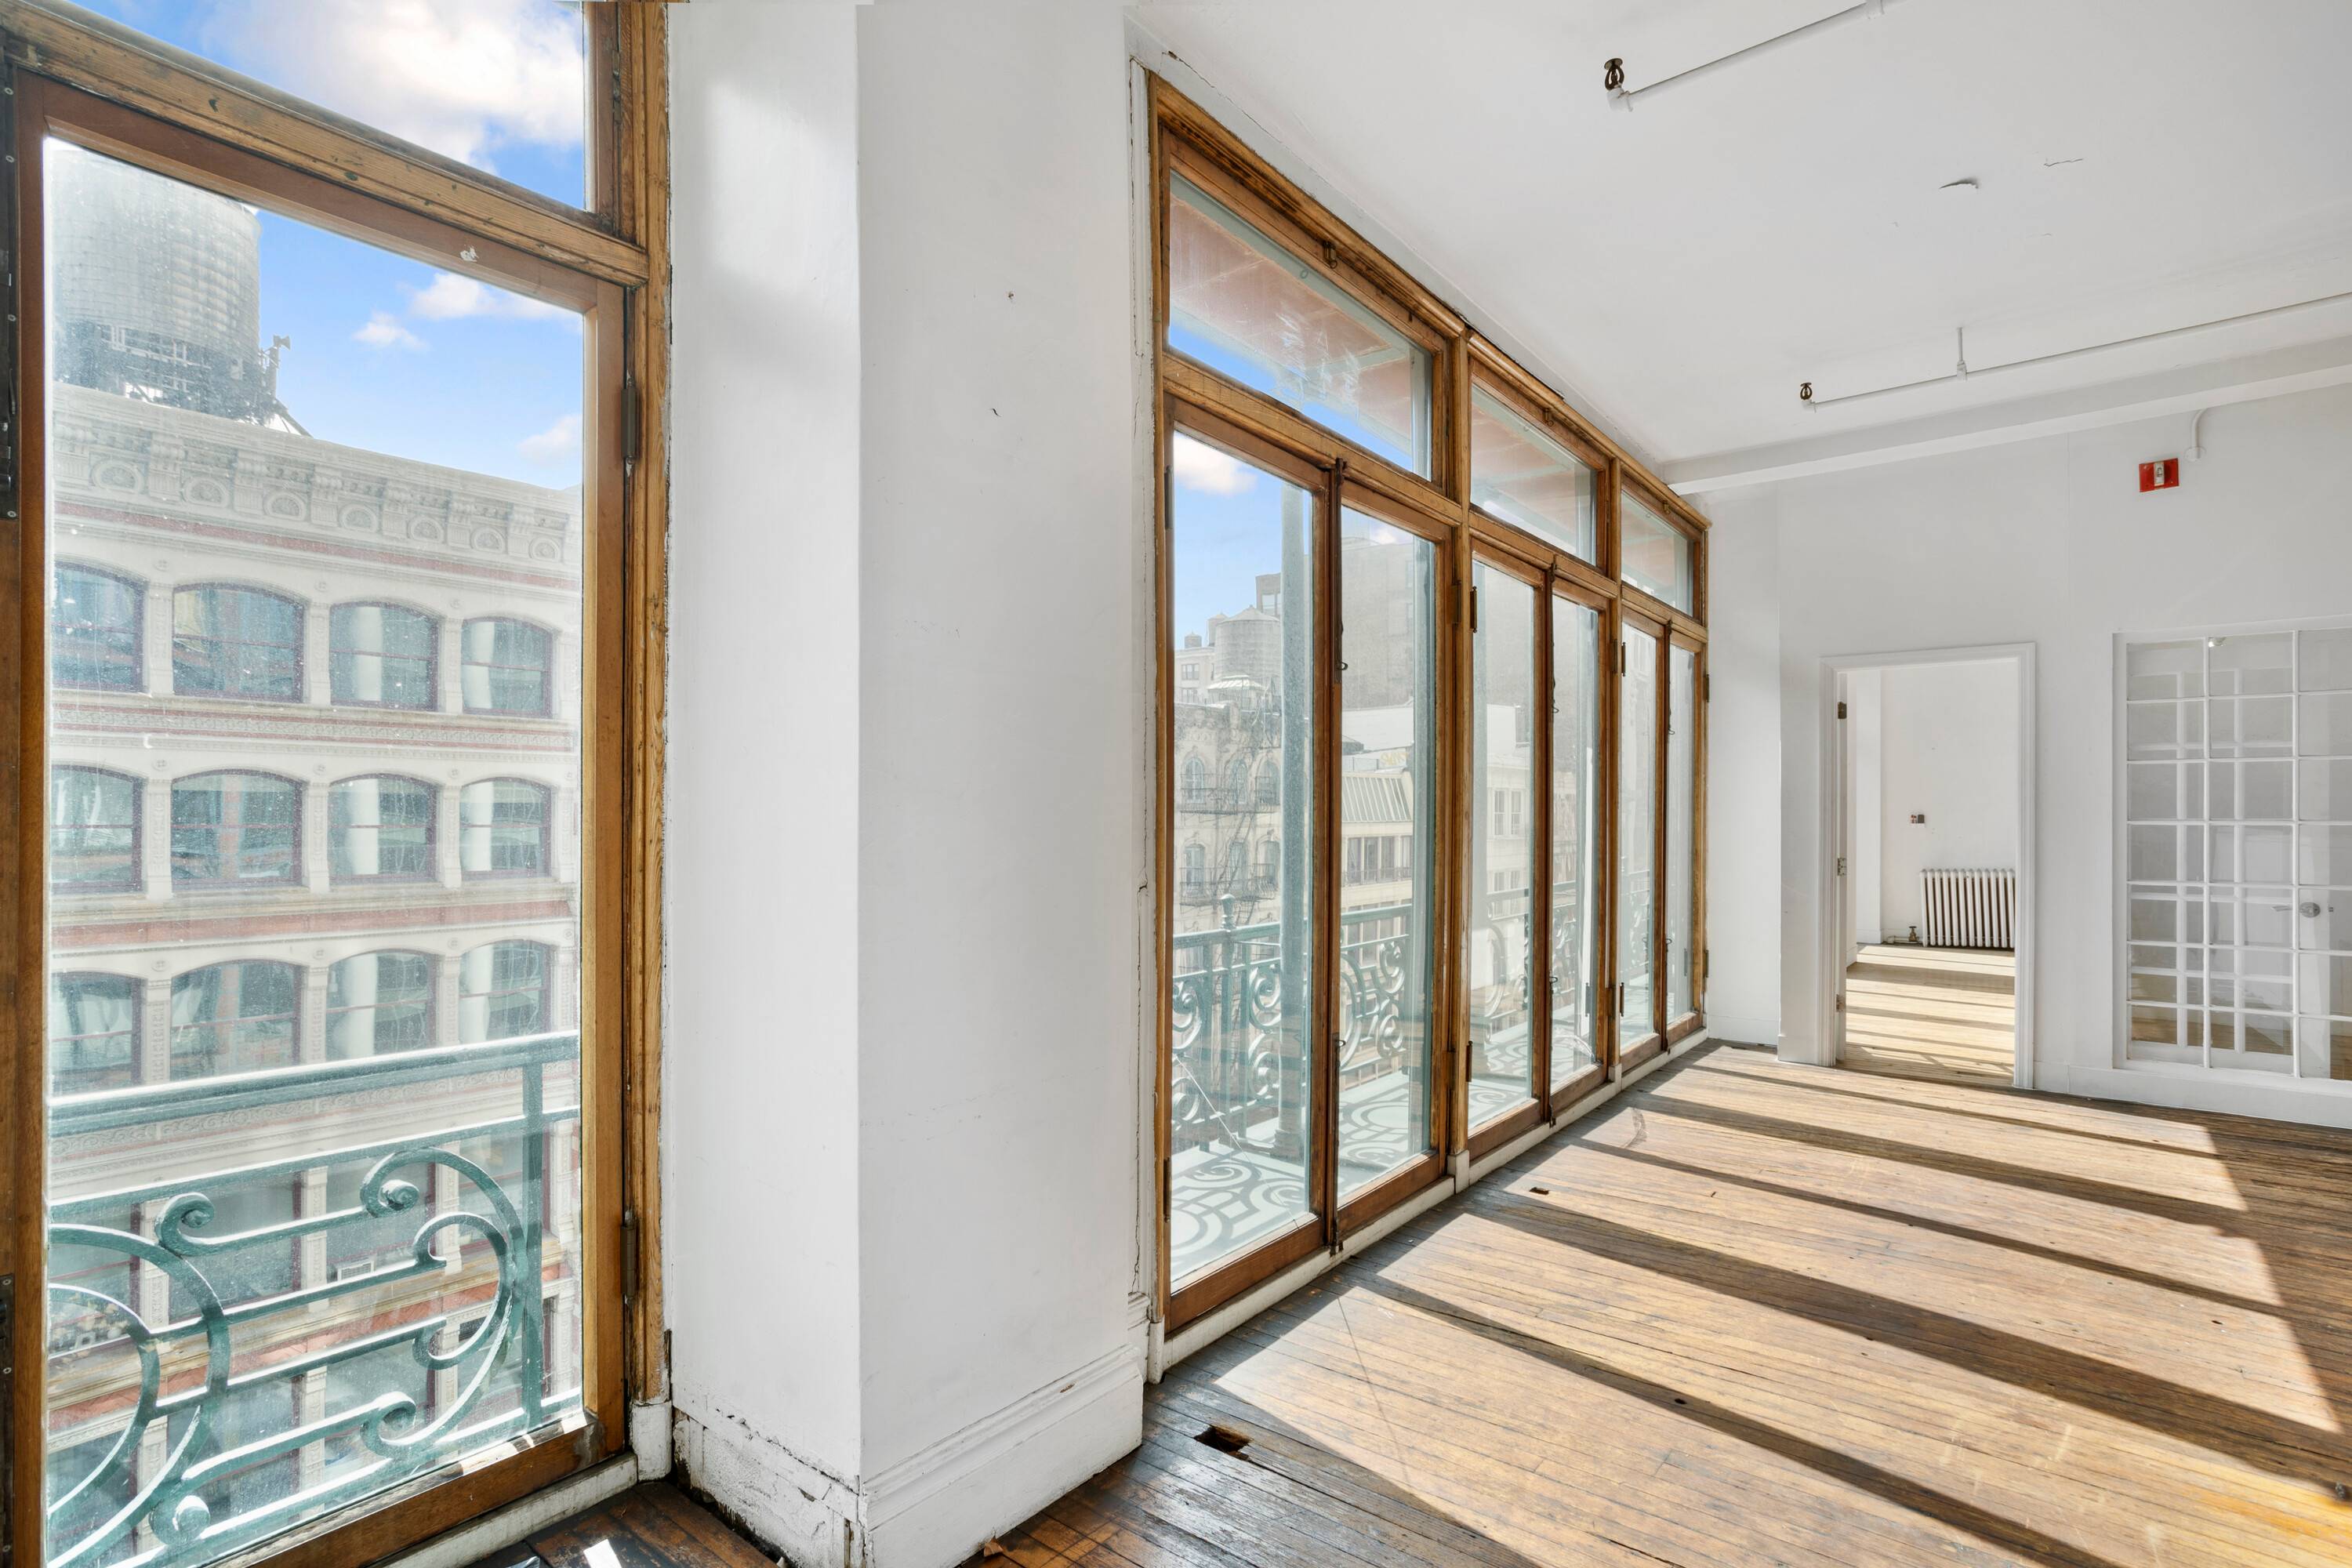 raw SOHO LOFT Offering - $6.695mm 8,016 sq ft commercial / retail, live / work space in prime Soho - 561 Broadway AKA 88 Prince Street